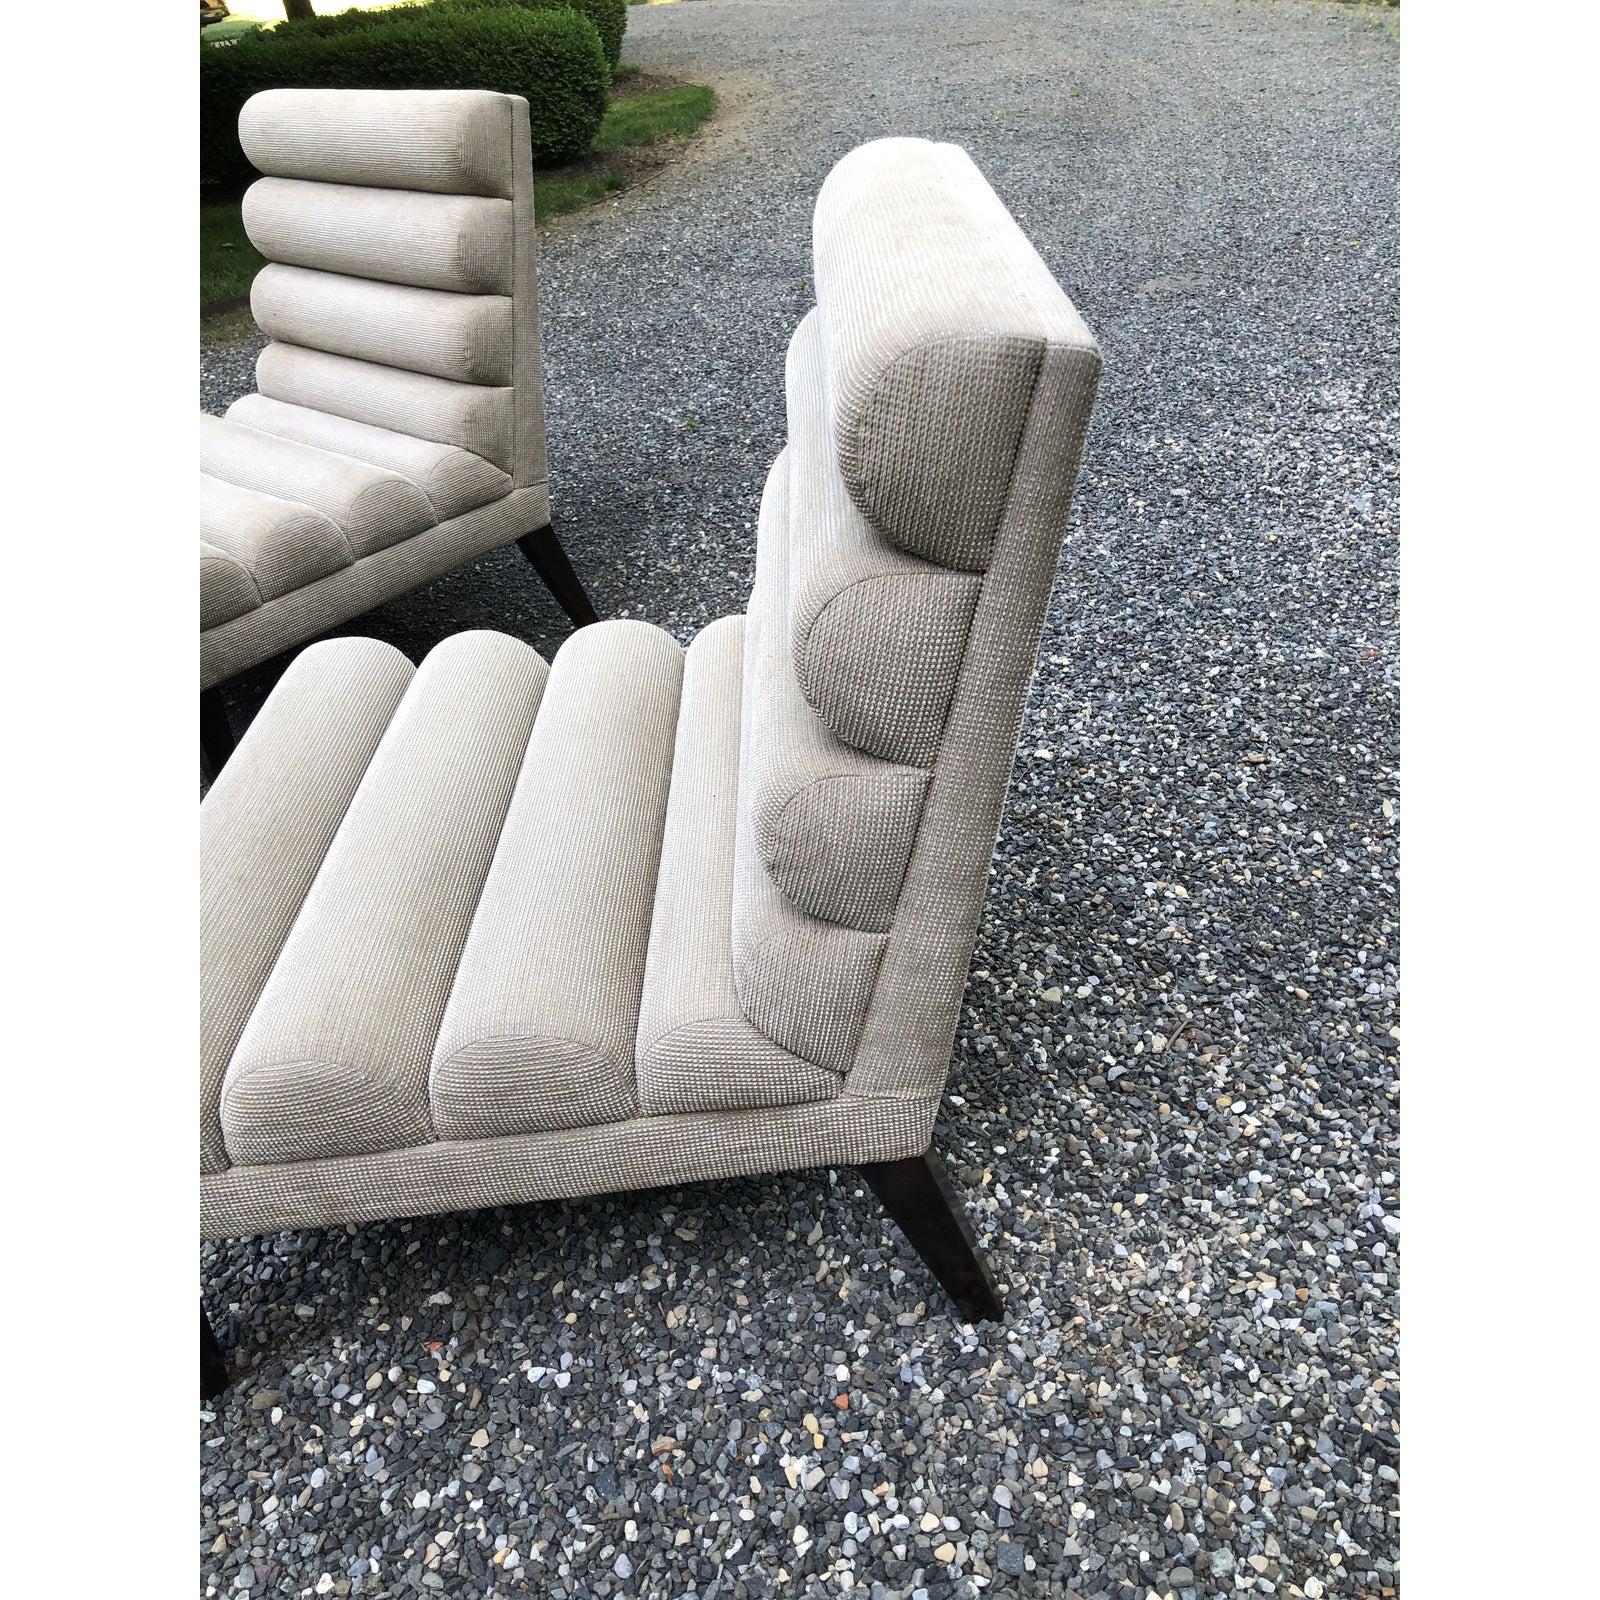 American Super Chic Pair of Mid-Century Modern Channel Back Slipper Chairs